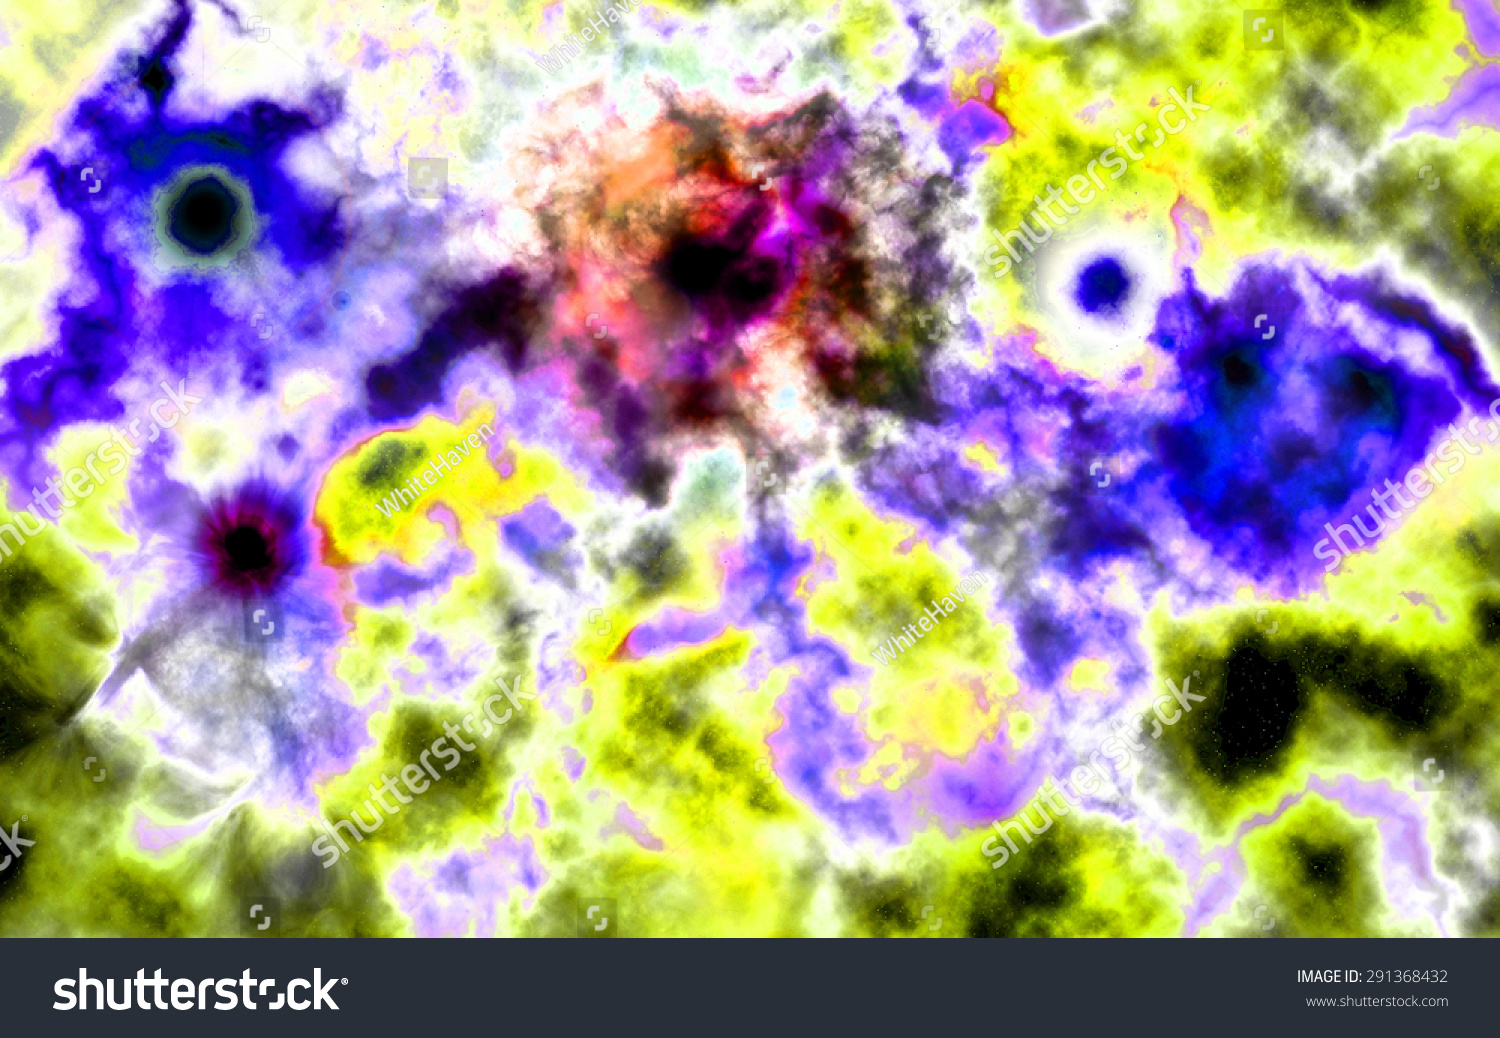 High Resolution Space Background Vividly Colored Stock Illustration 291368432 Shutterstock 5578